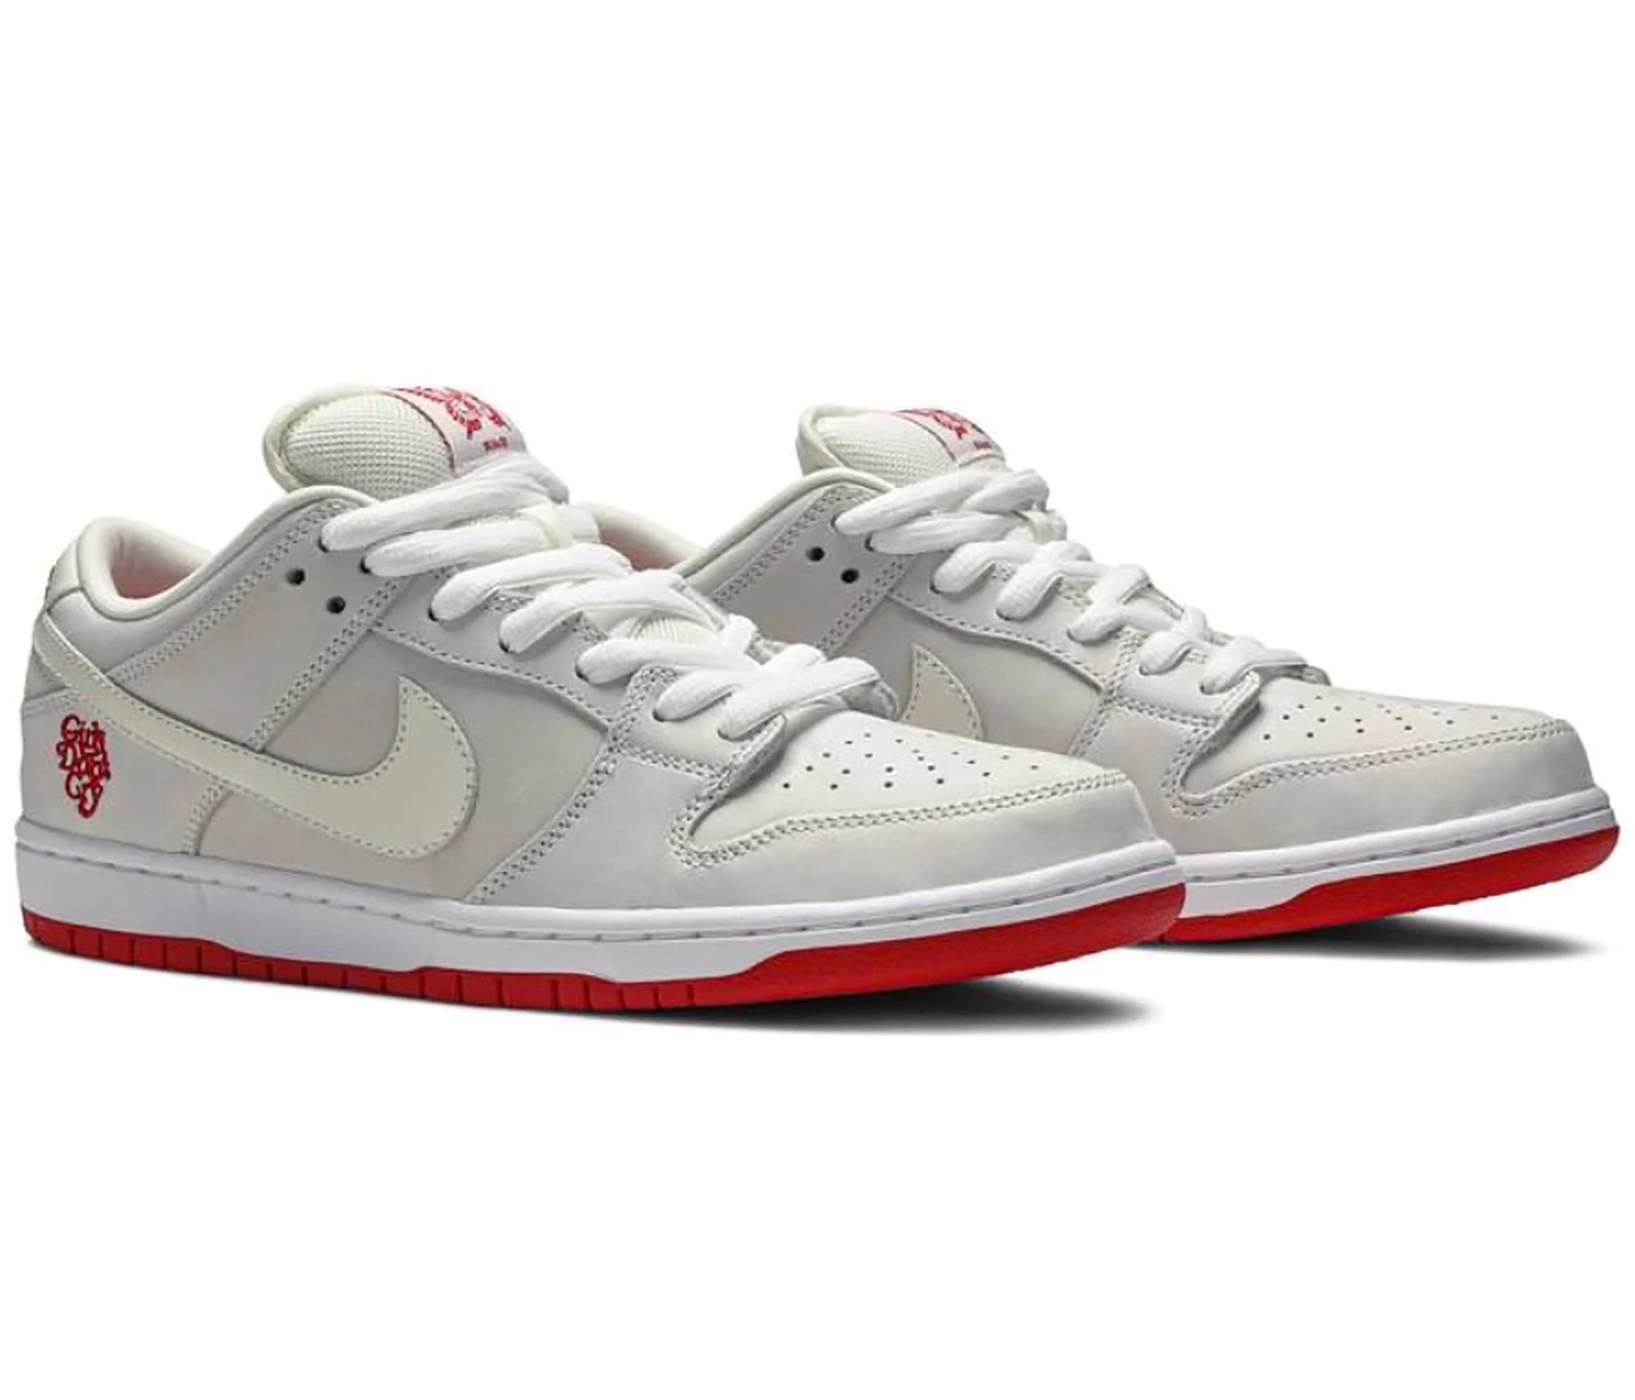 GIRLS DON'T CRY NIKE SB DUNK LOW - スニーカー